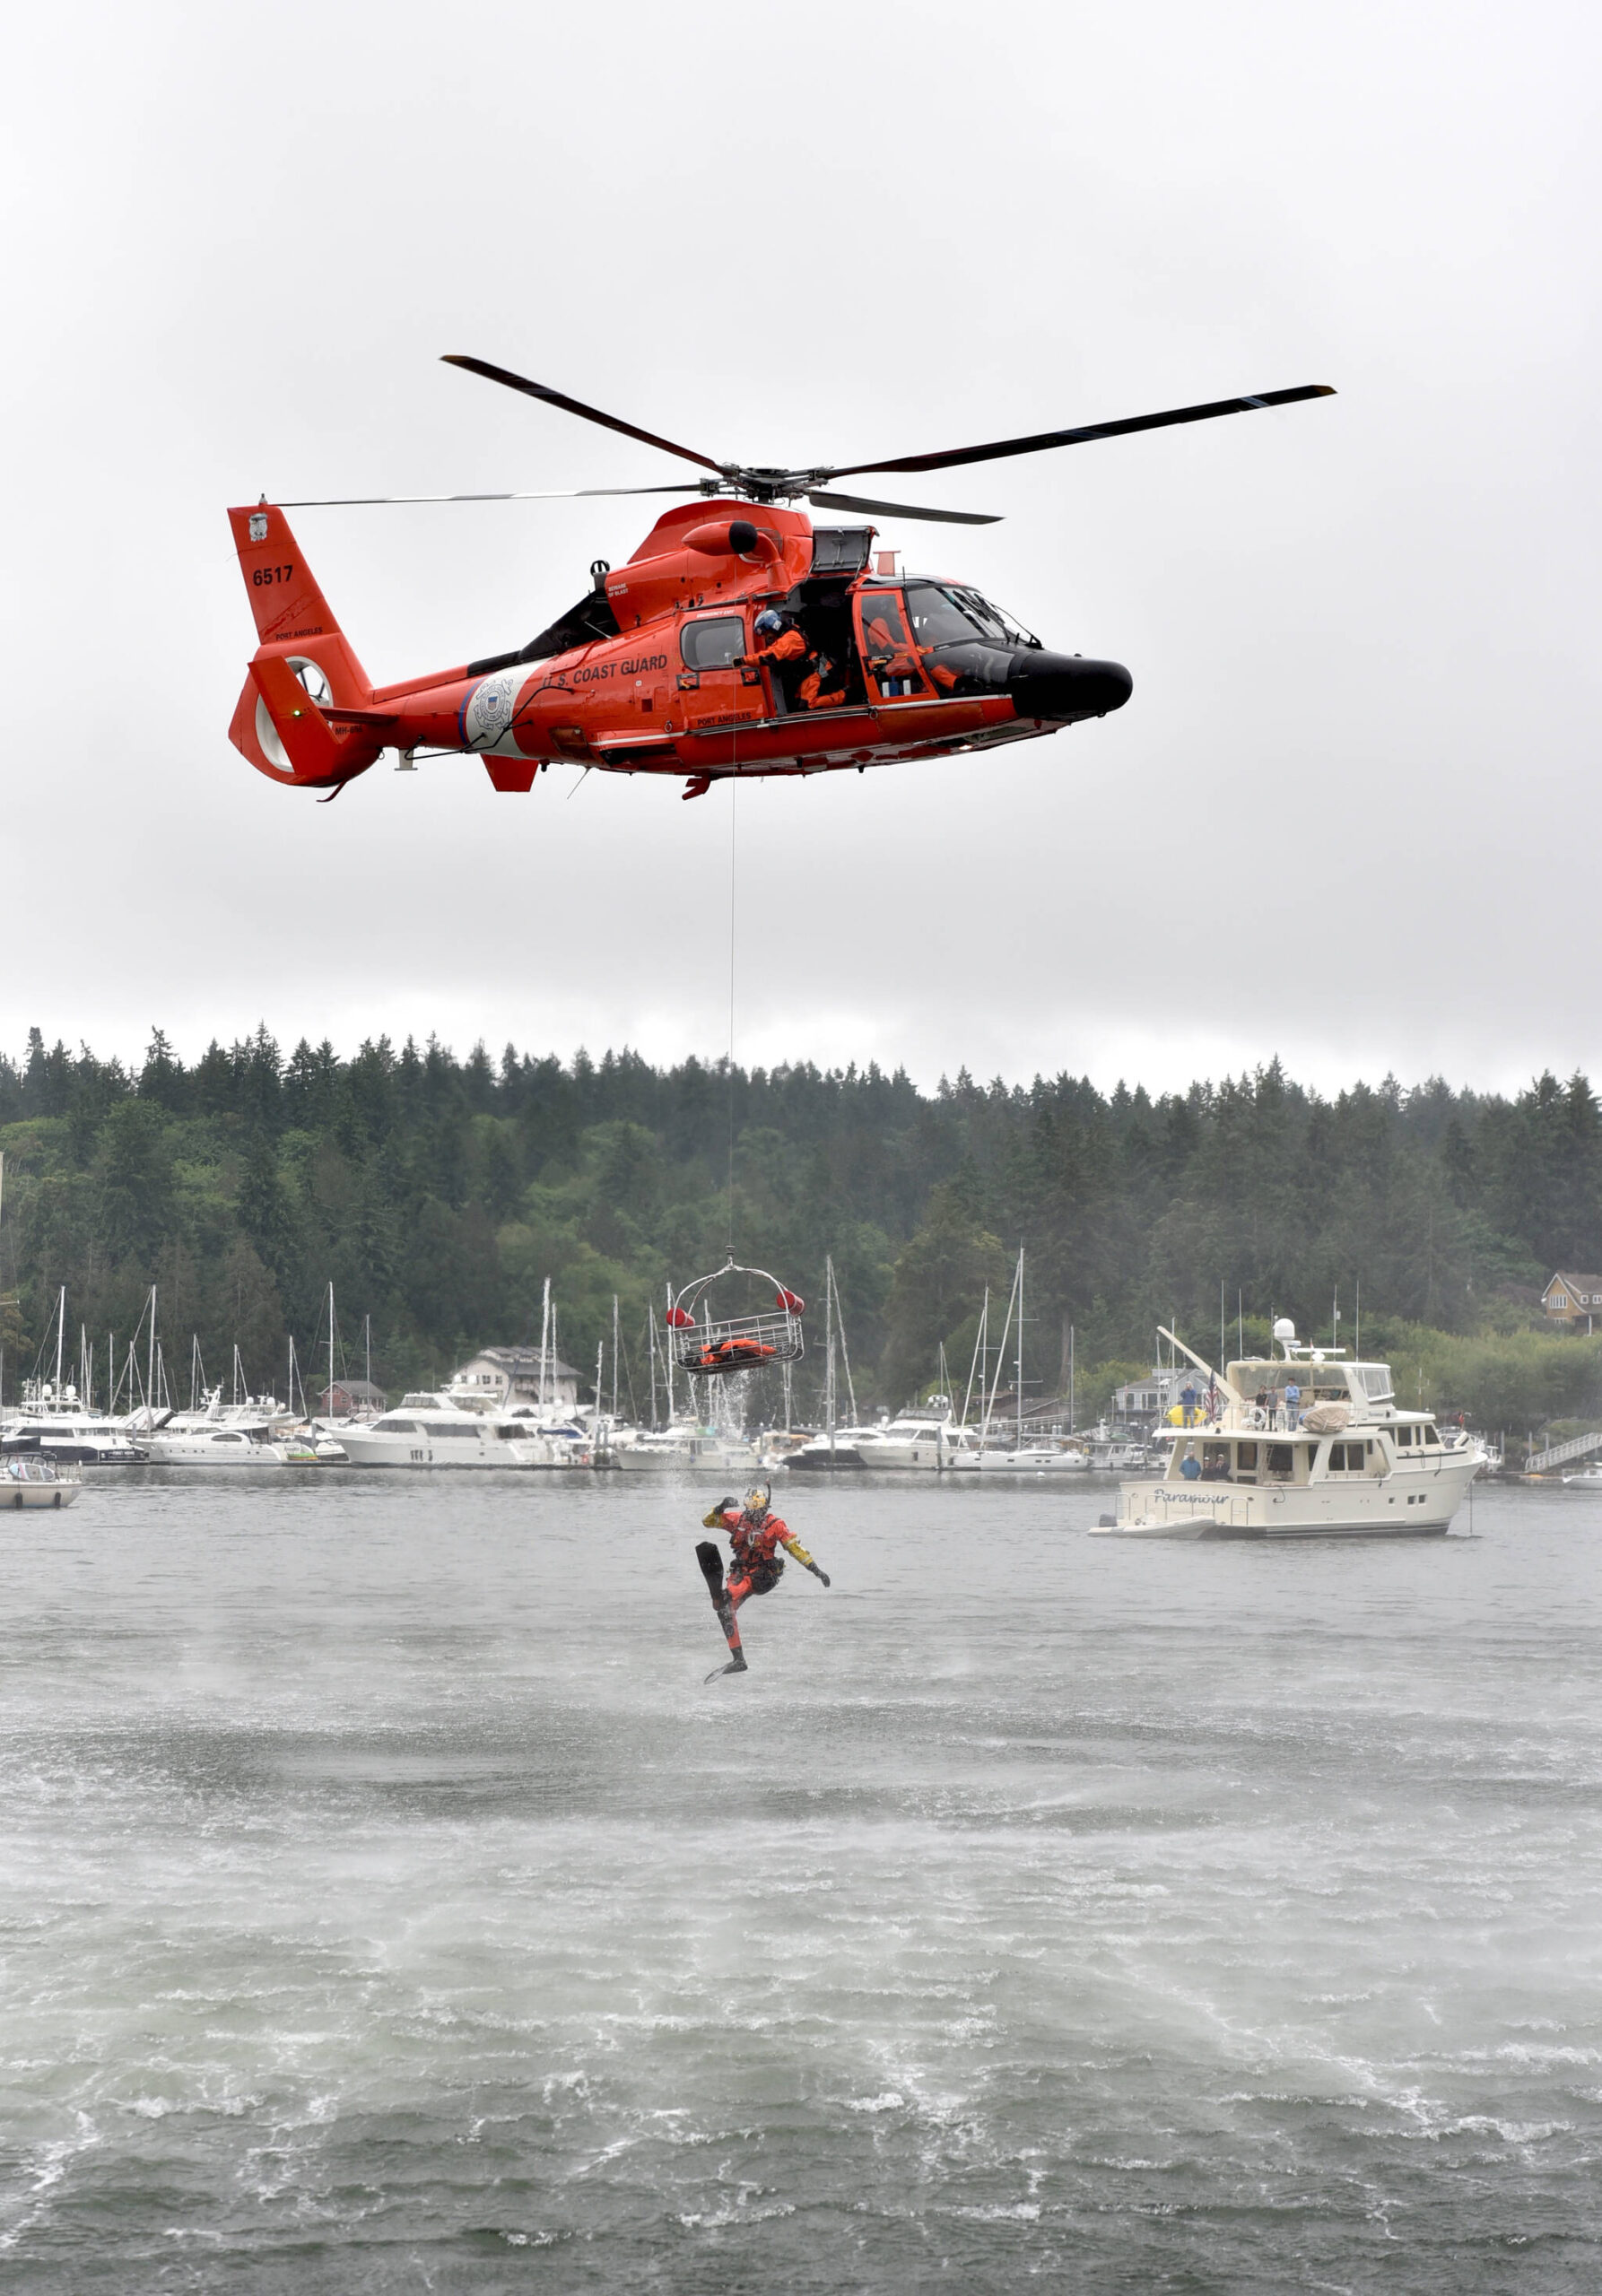 A U.S. Coast Guard diver falls from a rescue litter during a demonstration in Eagle Harbor during the annual Boater's Fair at Waterfront Park June 10. Nancy Treder/Kitsap News Group Photos